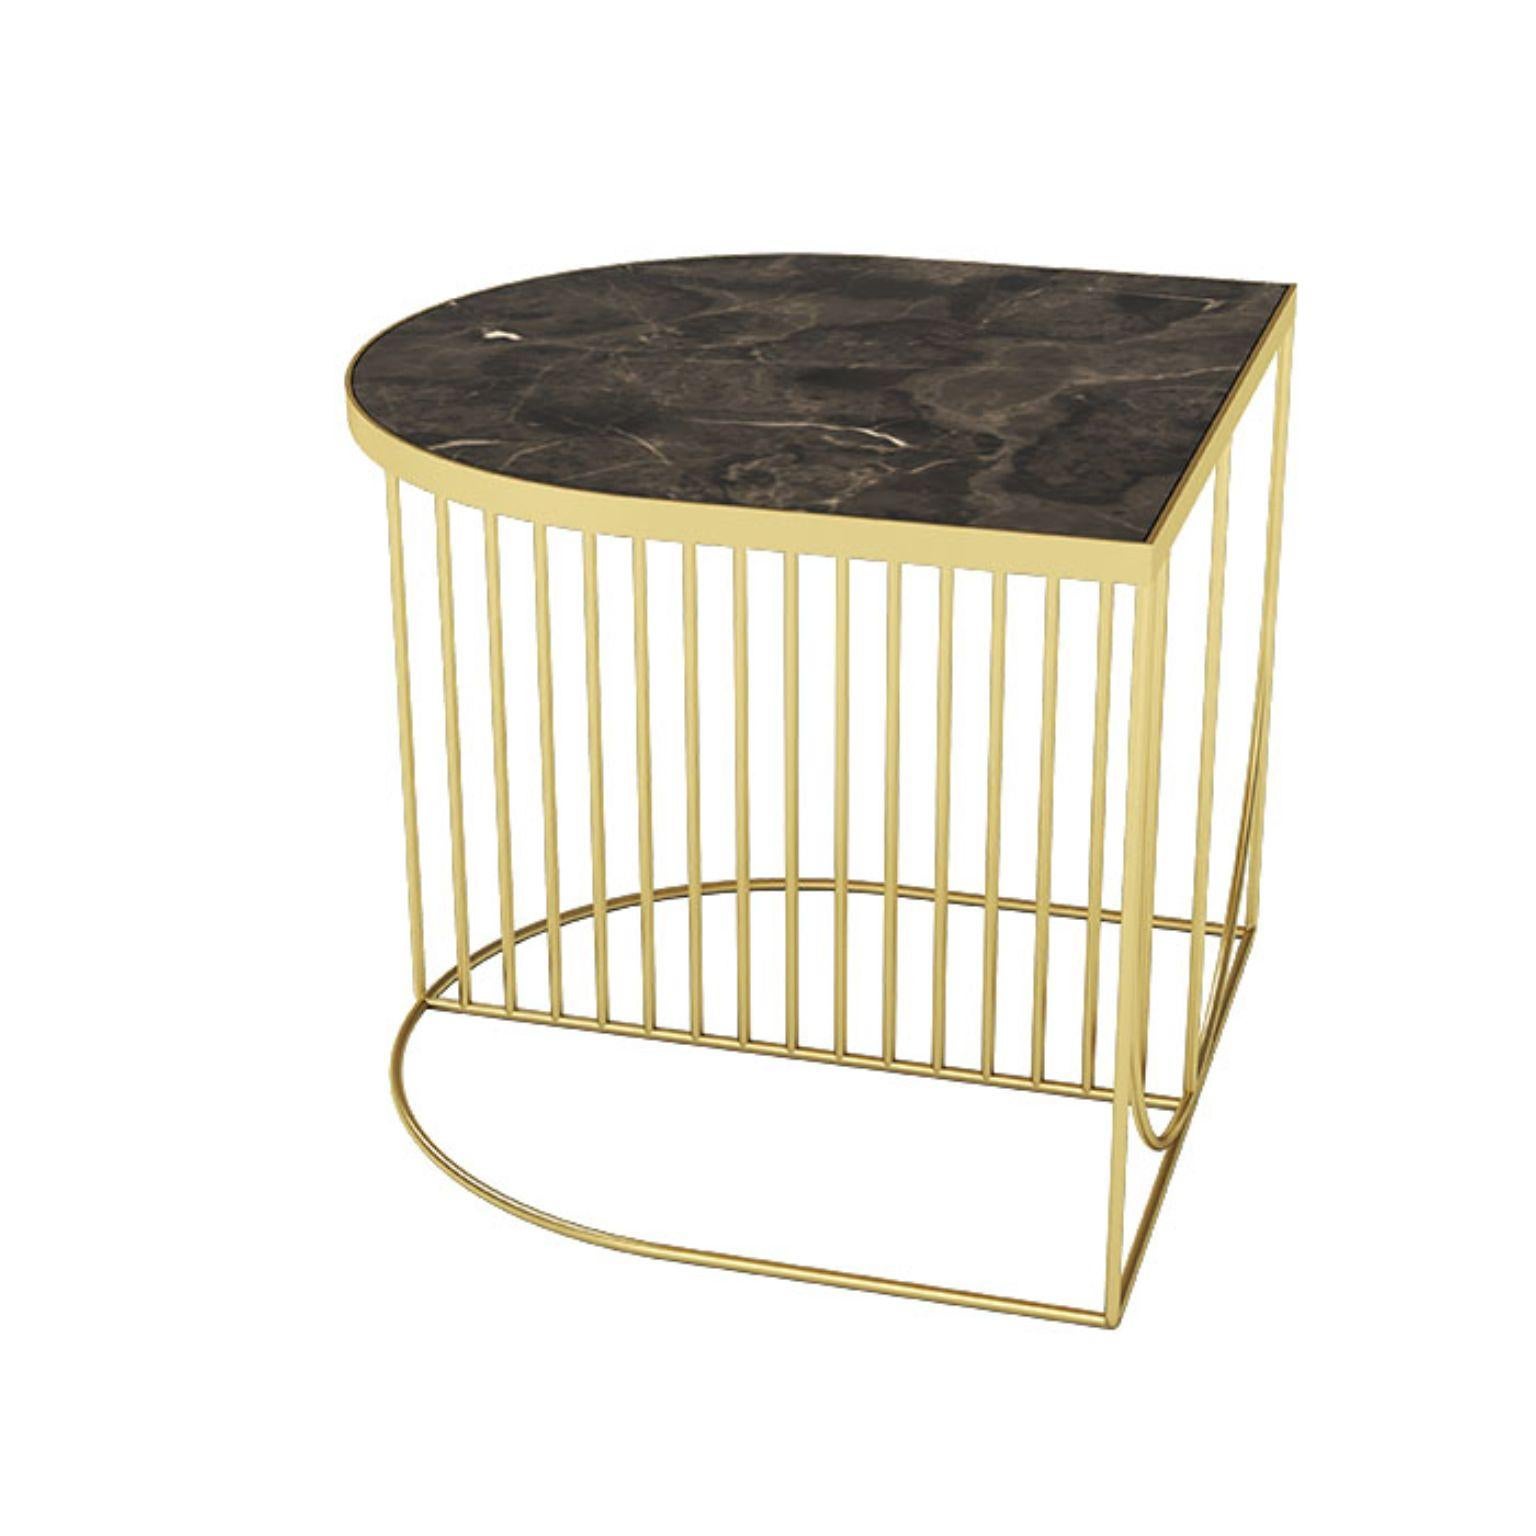 Brown marble and gold steel contemporary side table.
Dimensions: L 50 x W 50 x H 44.3 cm
Materials: Marble and steel 

This series consists of three different designs that you can combine in many different ways. The table tops come in two